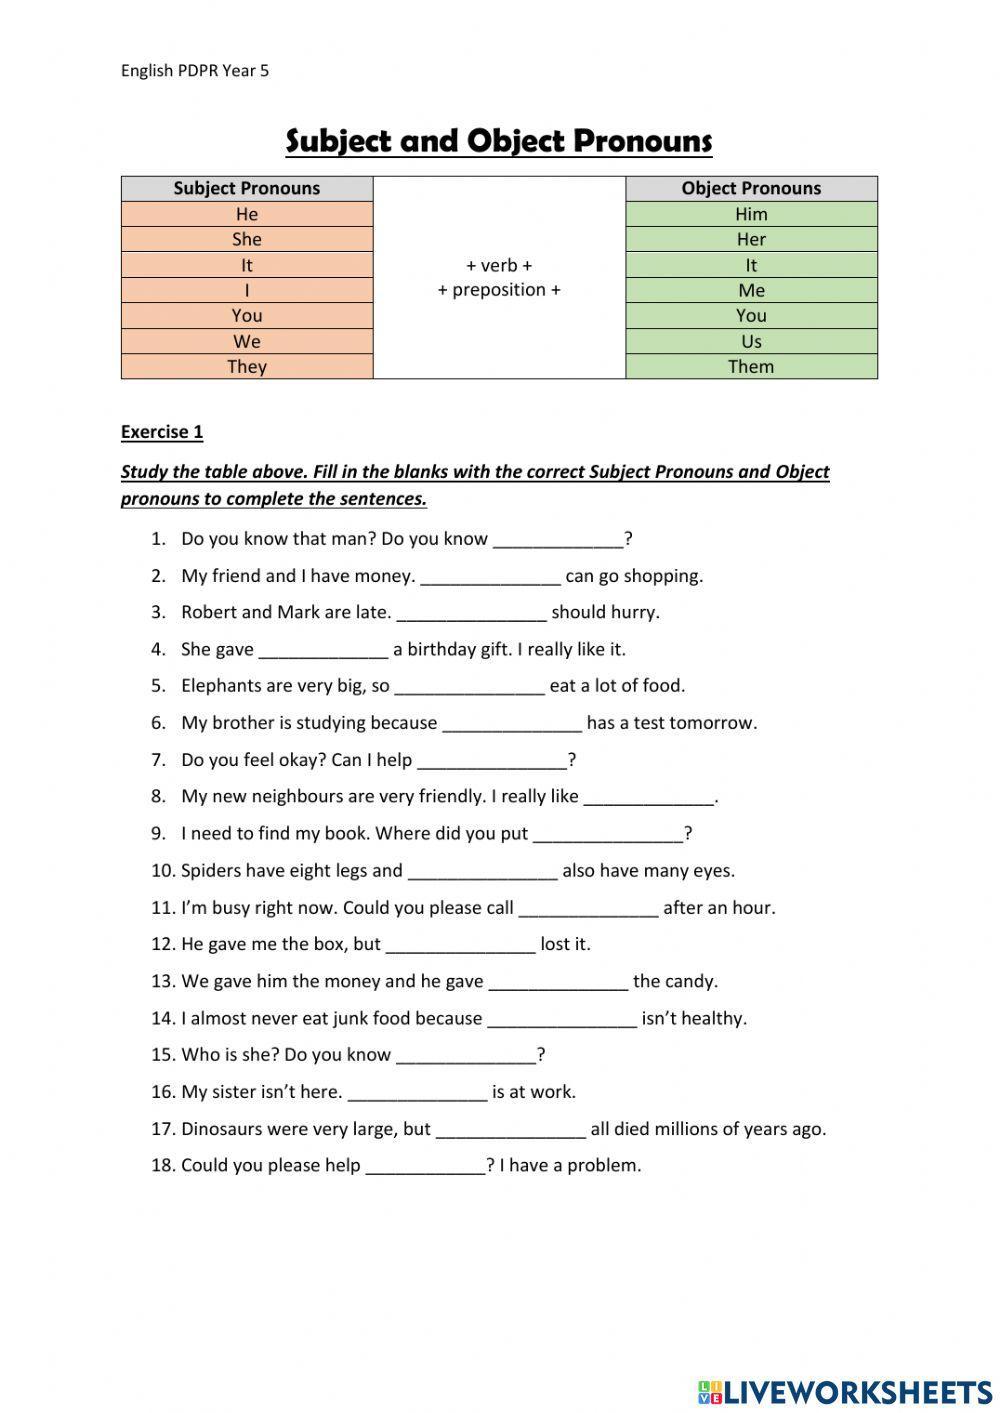 Subject and Object Pronouns 